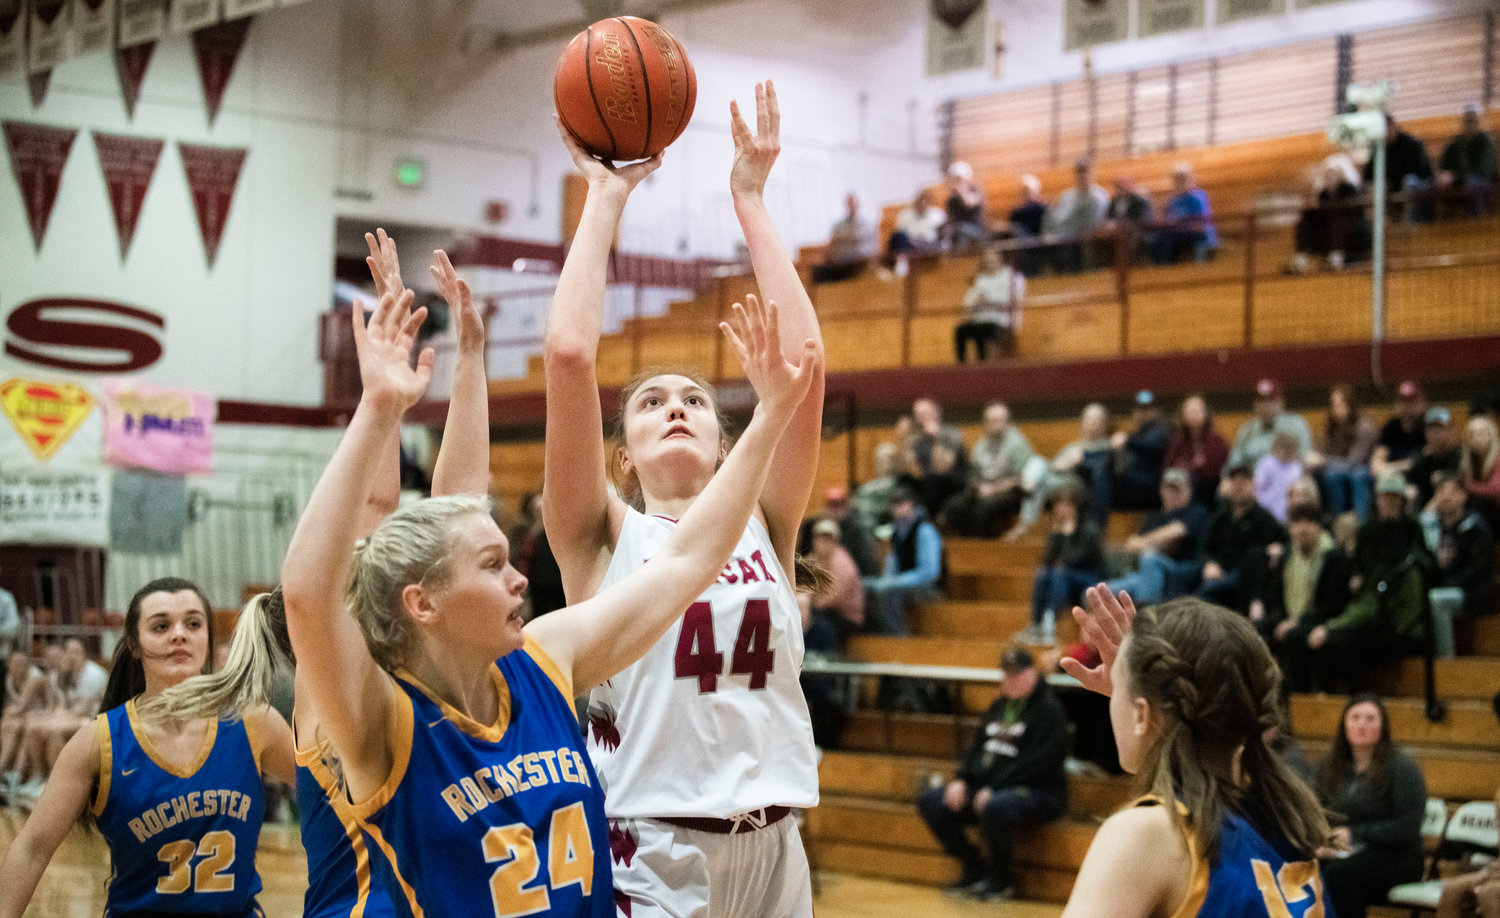 W.F. West’s Julia Dalan (44) looks to score during a game against Rochester in Chehalis on Jan. 11.